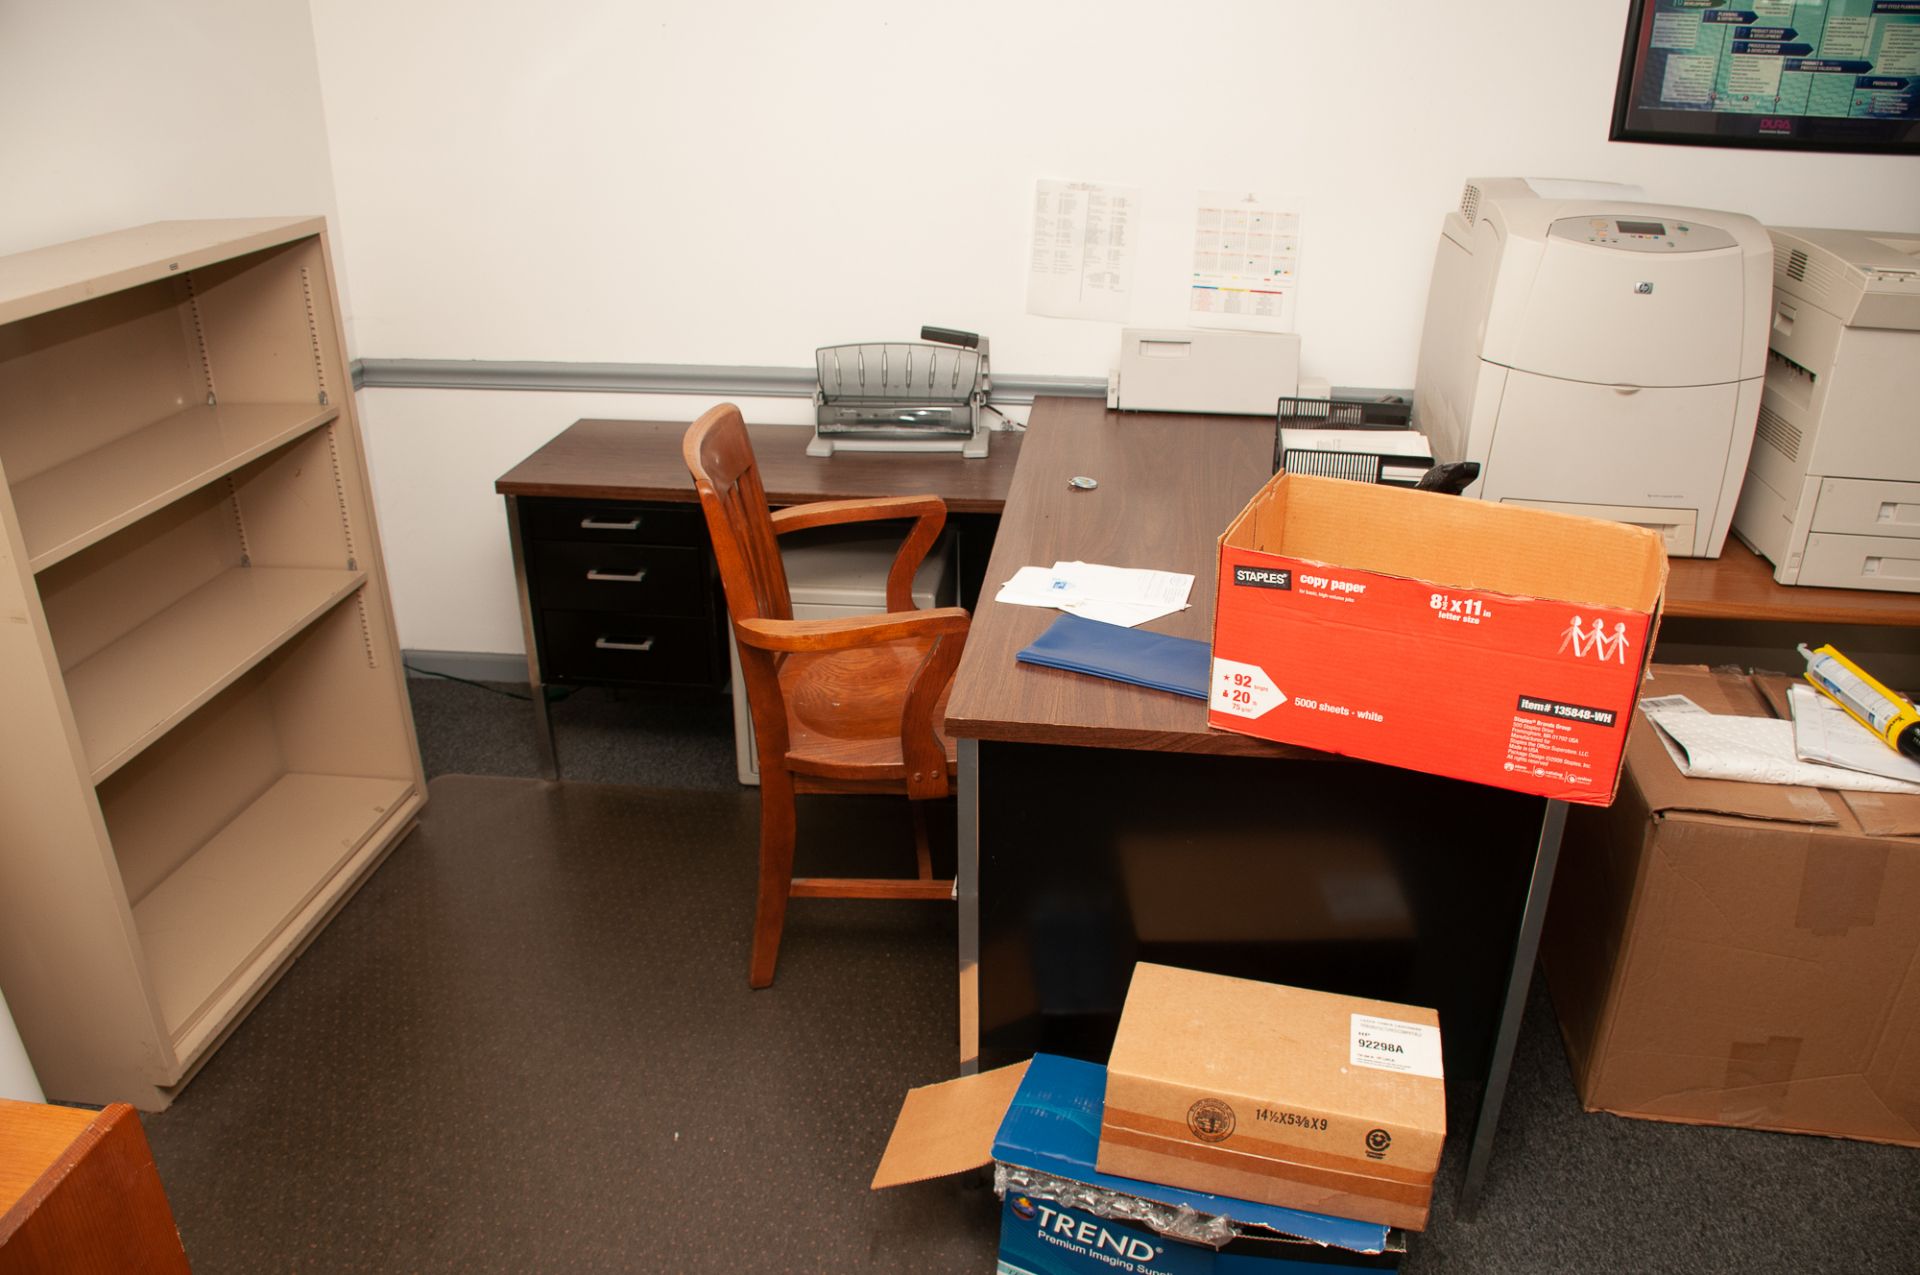 Office Furniture On Second Floor Front of Building, Microwave, Refridgerator, Desks Chairs, Filing C - Image 31 of 37